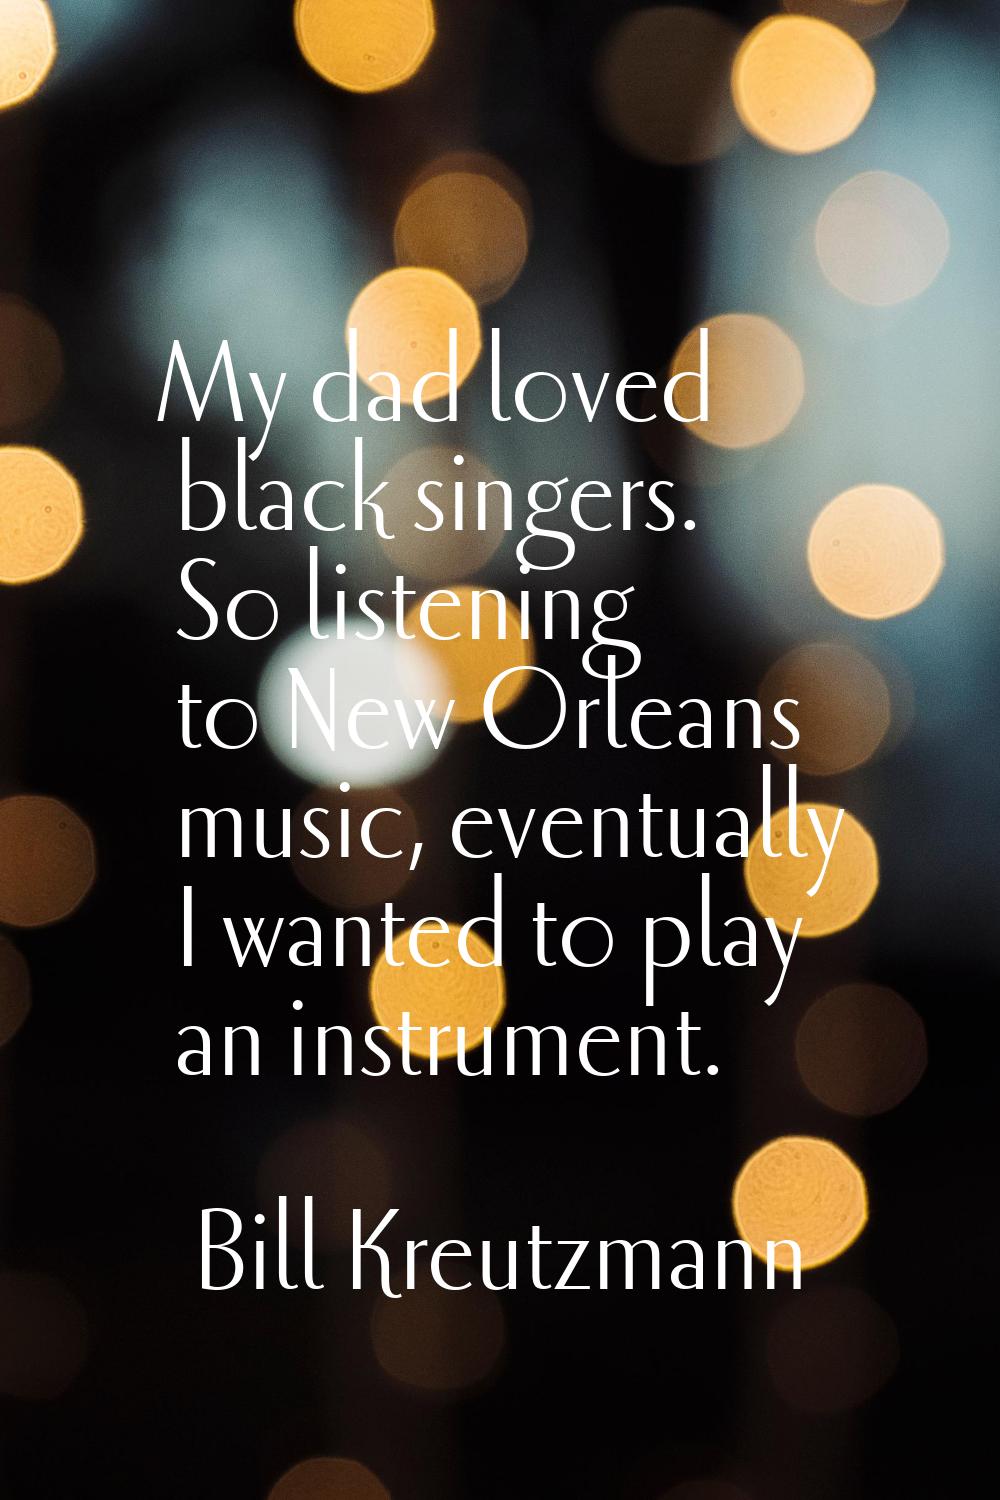 My dad loved black singers. So listening to New Orleans music, eventually I wanted to play an instr